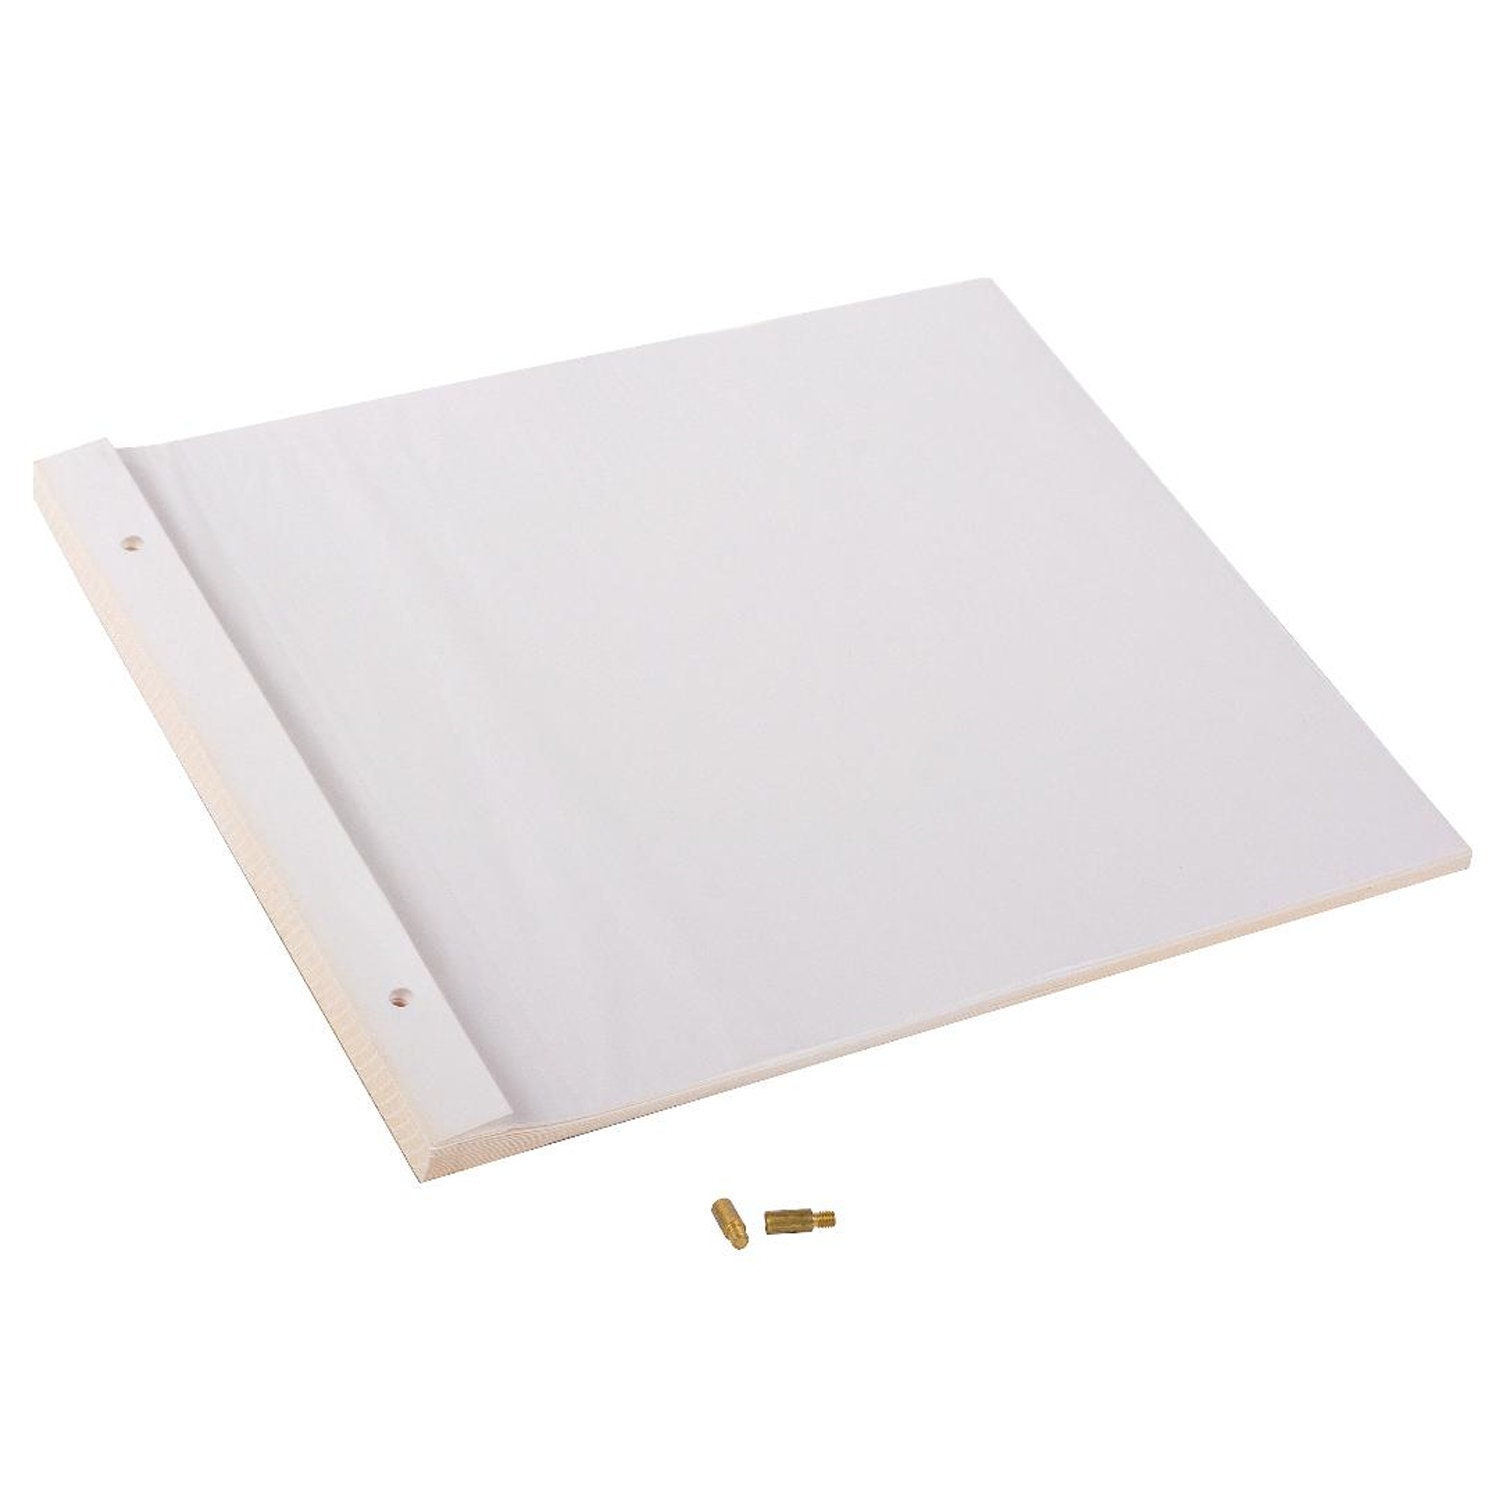 Red Co. 10.75 inch Square Self Adhesive Photo Album Refill Sheets, 1 Pack  of 12 - White Large